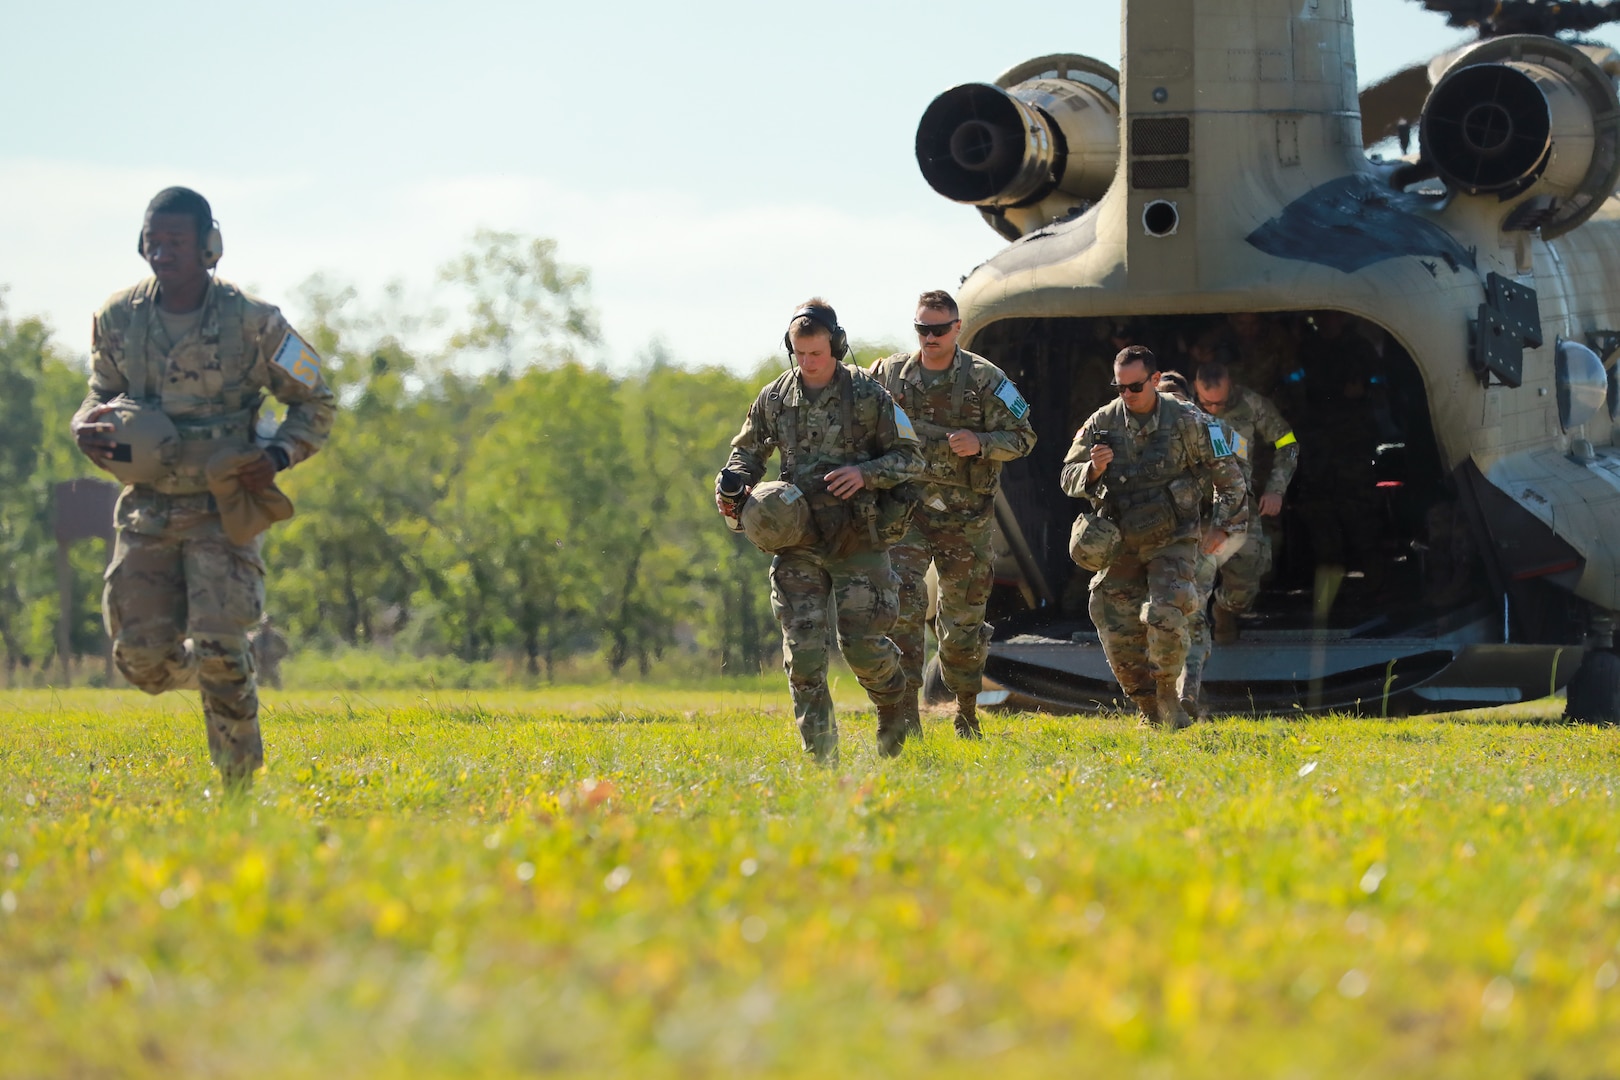 U.S. Army National Guard members exit a Boeing CH-47 Chinook during the Region III Best Warrior Competition on Camp Blanding, Fla., May 12, 2022. The Regional Best Warrior Competition highlights the lethality, readiness and capabilities of Army National Guardsmen throughout the southeastern region.